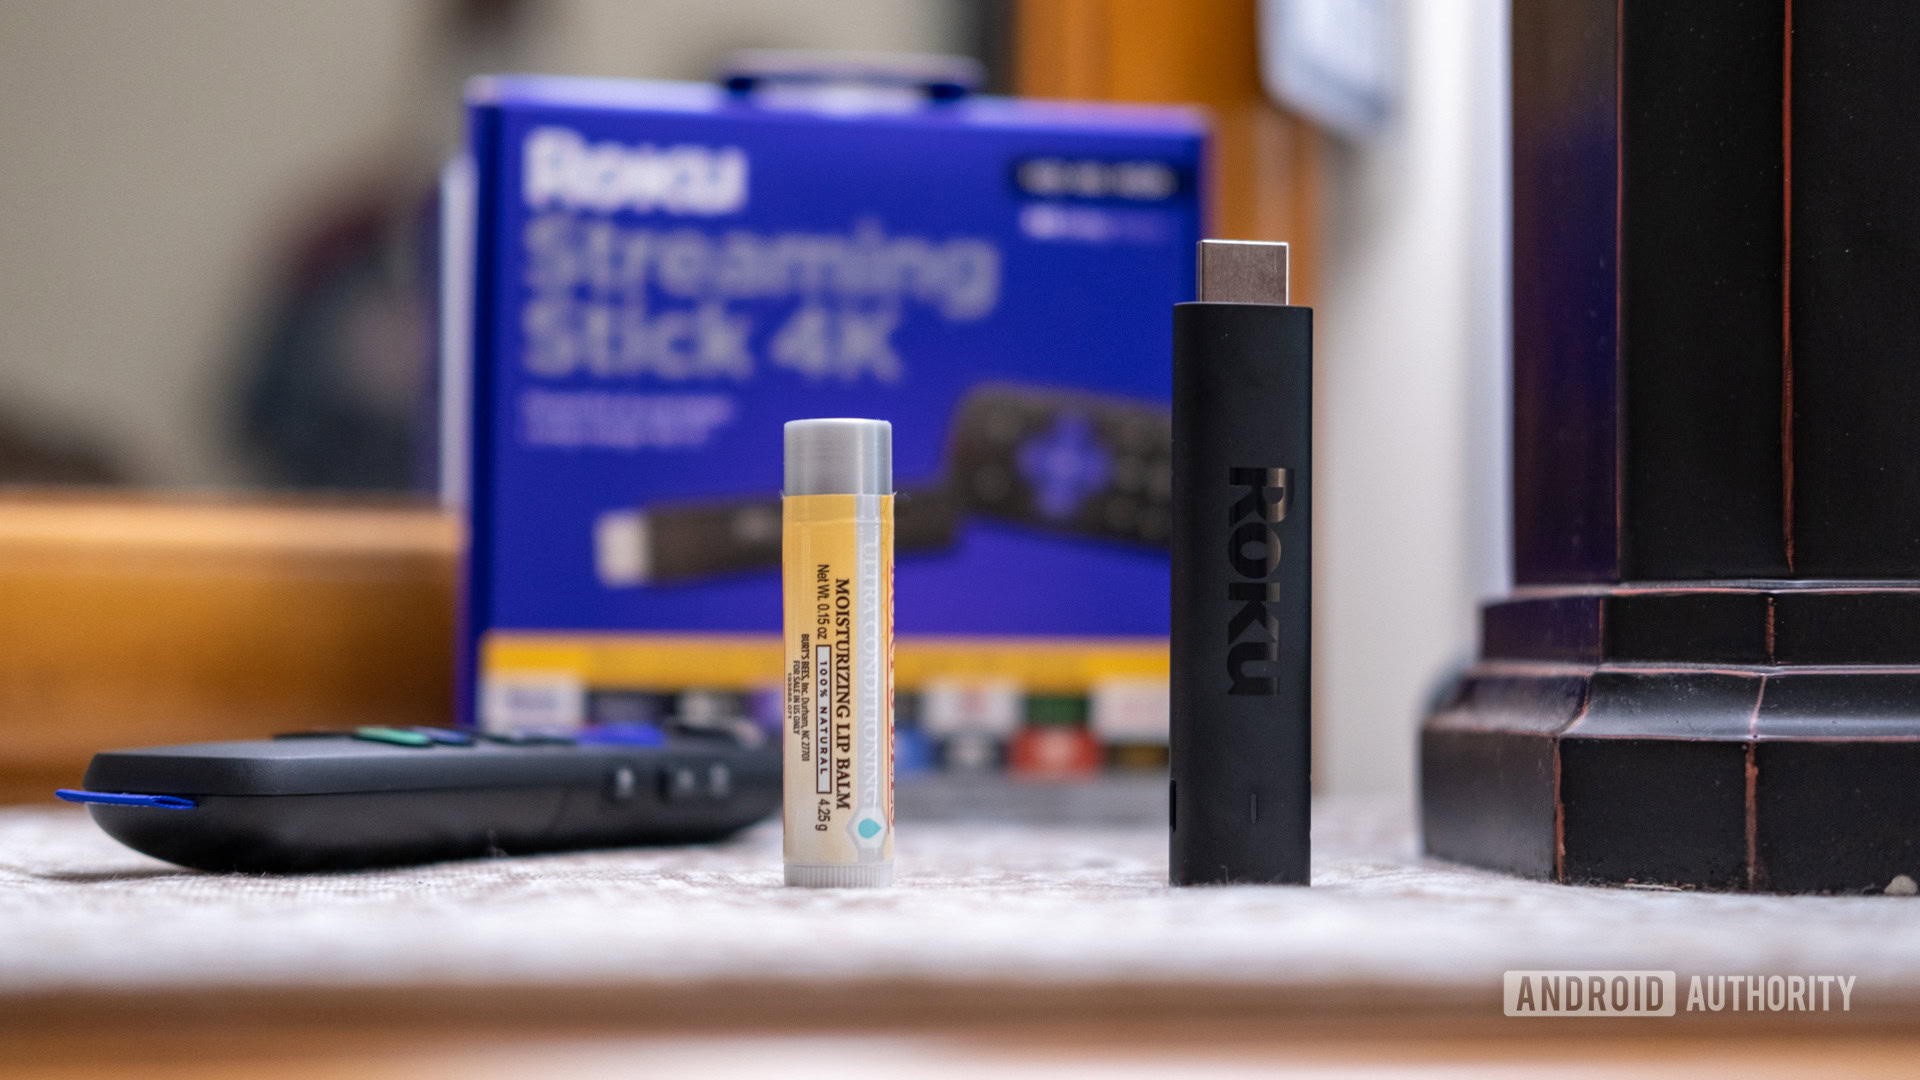 The Roku Streaming Stick 4K next to lip balm for scale